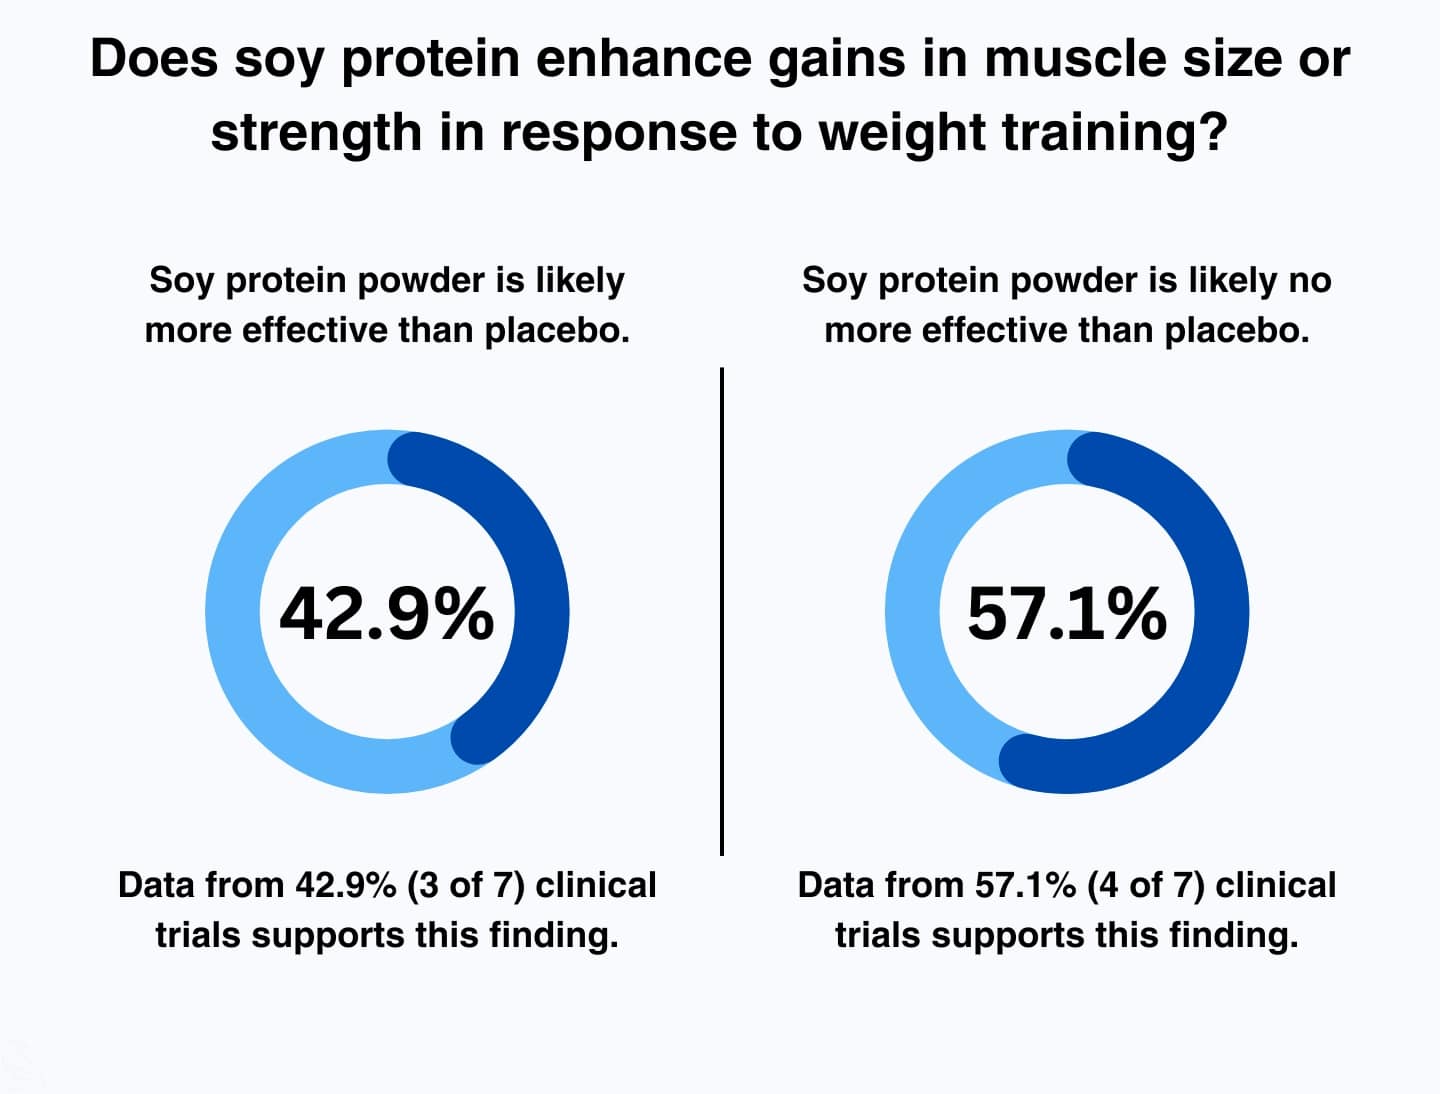 This image shows that soy protein powder doesn't reduce gains or make it harder to build muscle. 429.% of clinical trials sugges soy protein helps build muscle while 57.3% of clinical trials suggest soy protein does nothing to help or hurt build muscle.